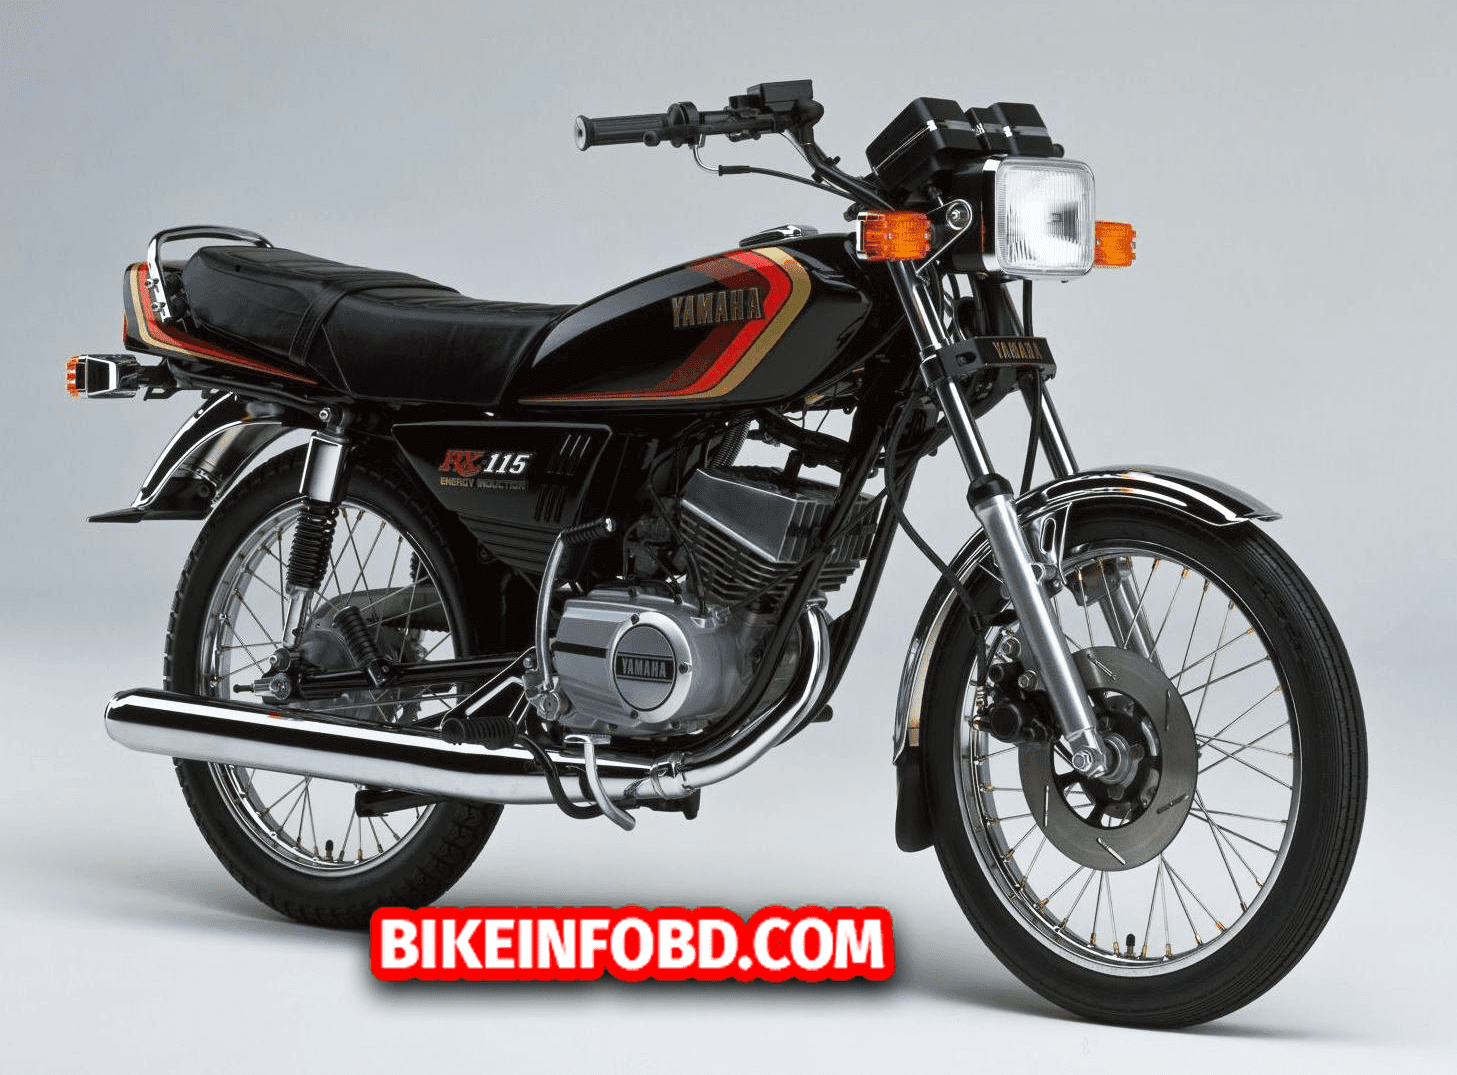 Yamaha RX-S 115 (Japan) Specifications, Review, Top Speed, & Mileage